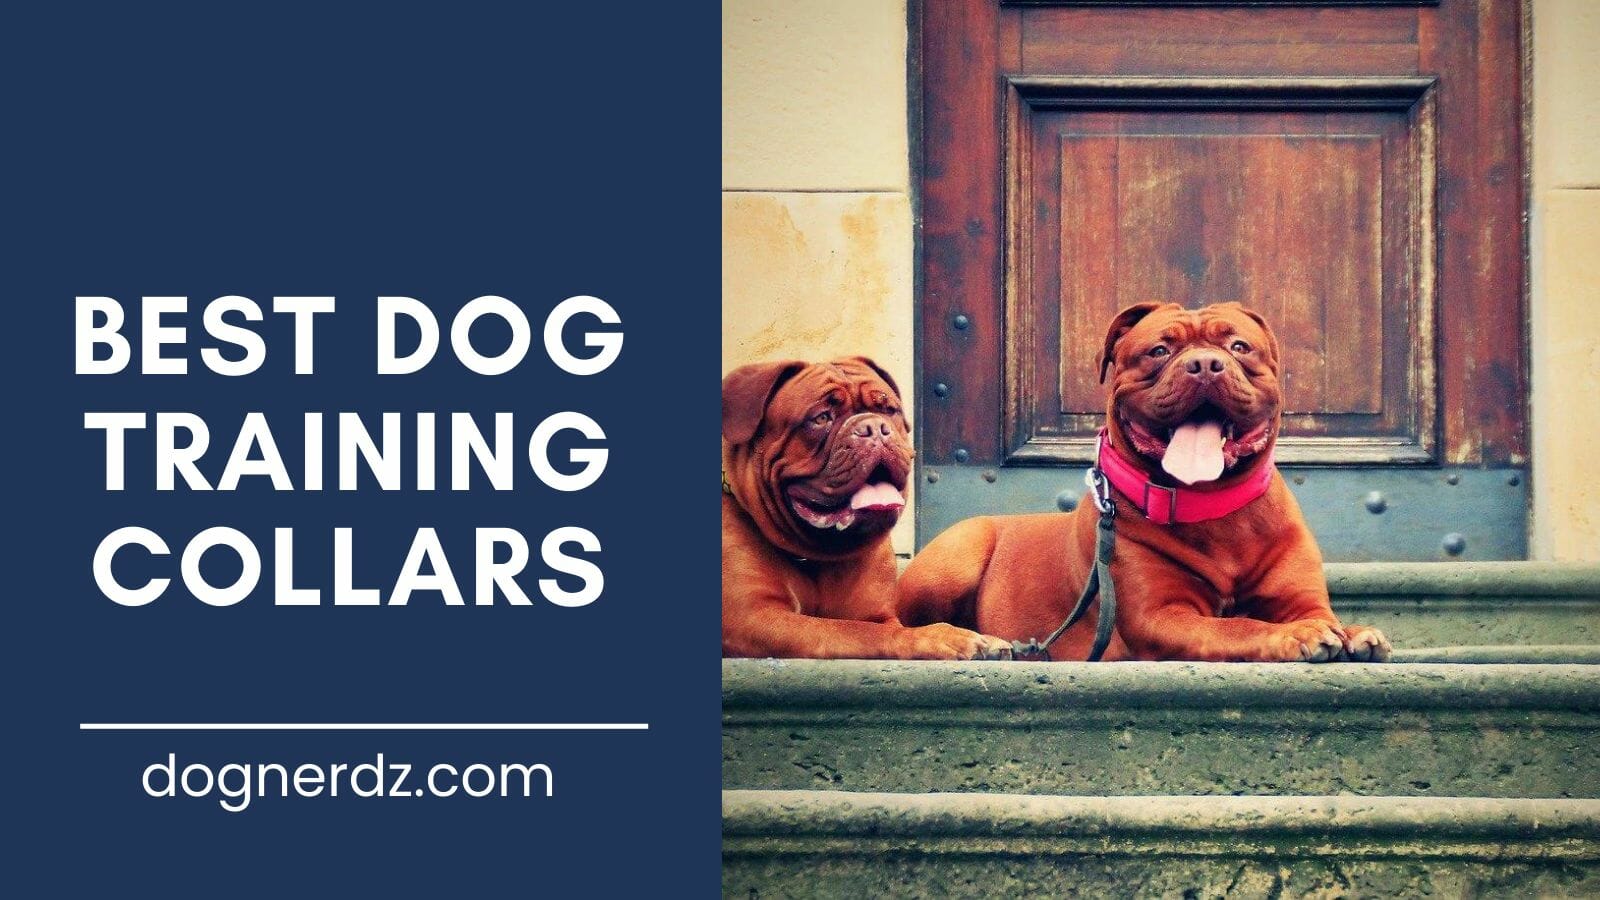 review of the best dog training collars